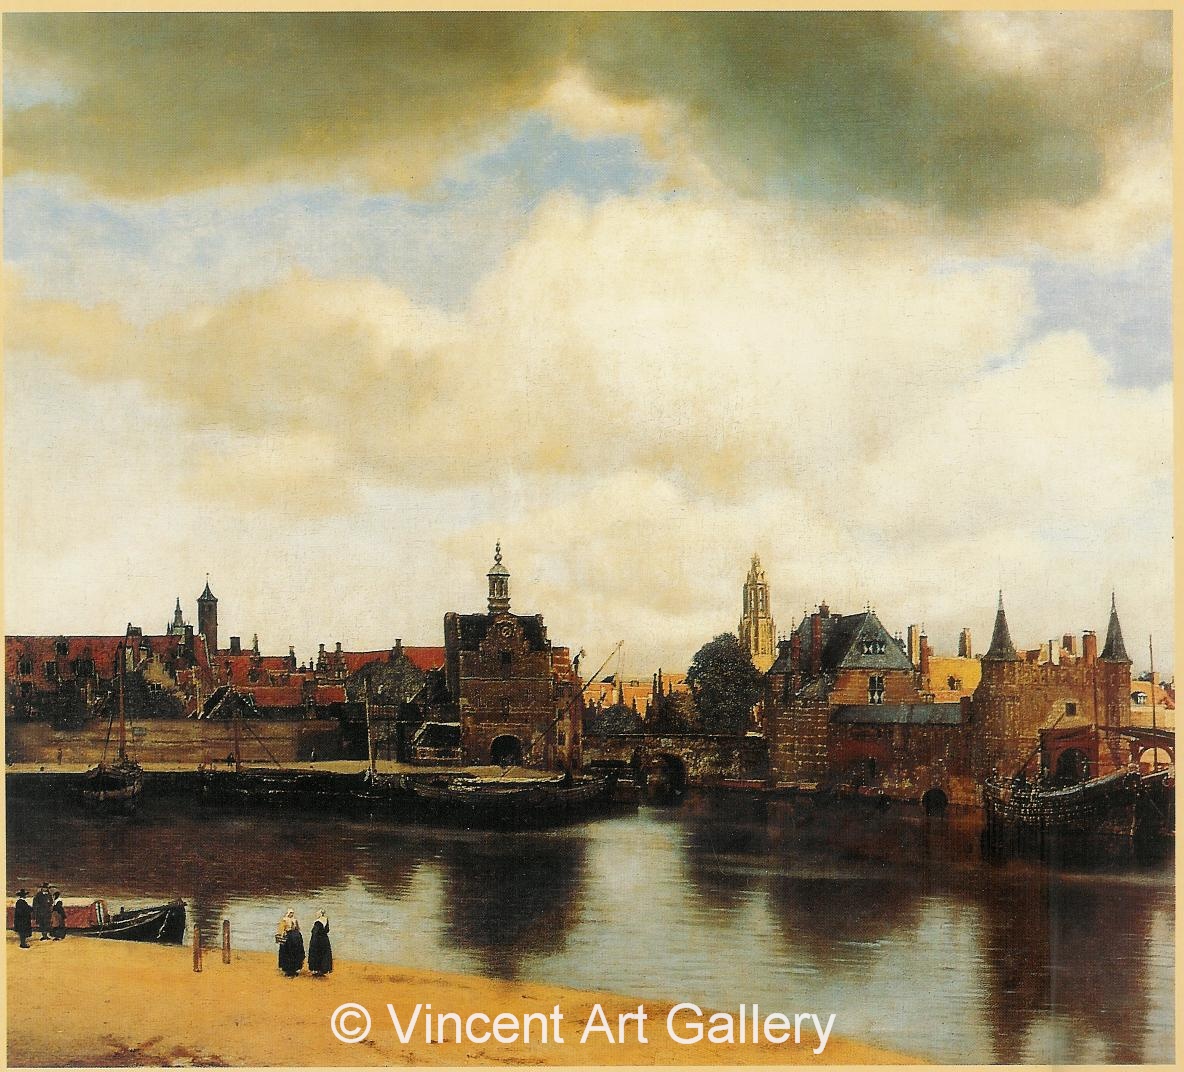 A635, VERMEER, View of Delft 001